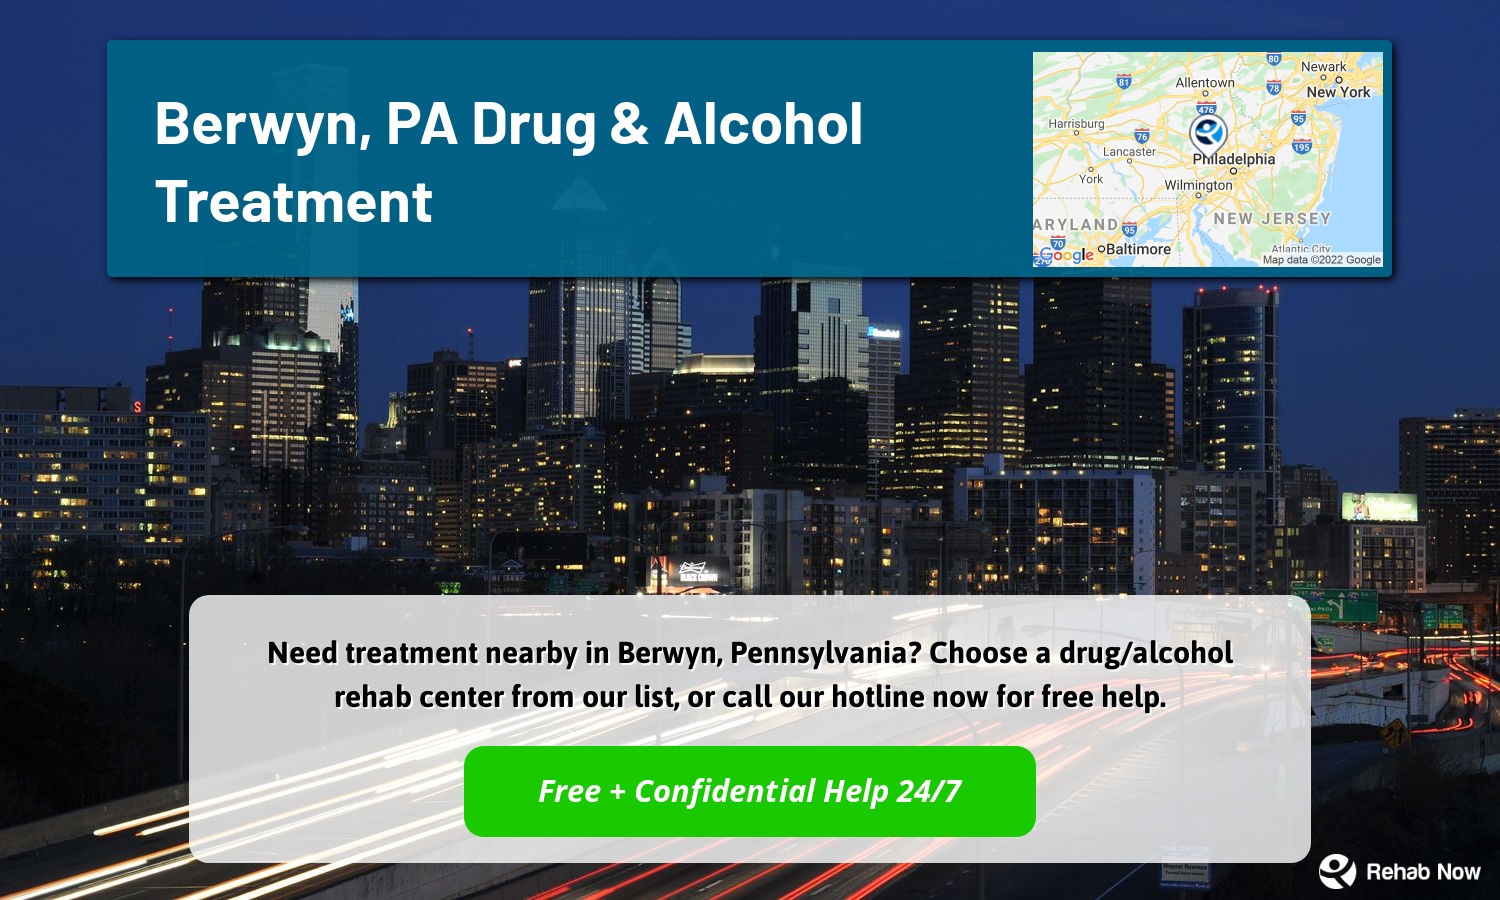 Need treatment nearby in Berwyn, Pennsylvania? Choose a drug/alcohol rehab center from our list, or call our hotline now for free help.